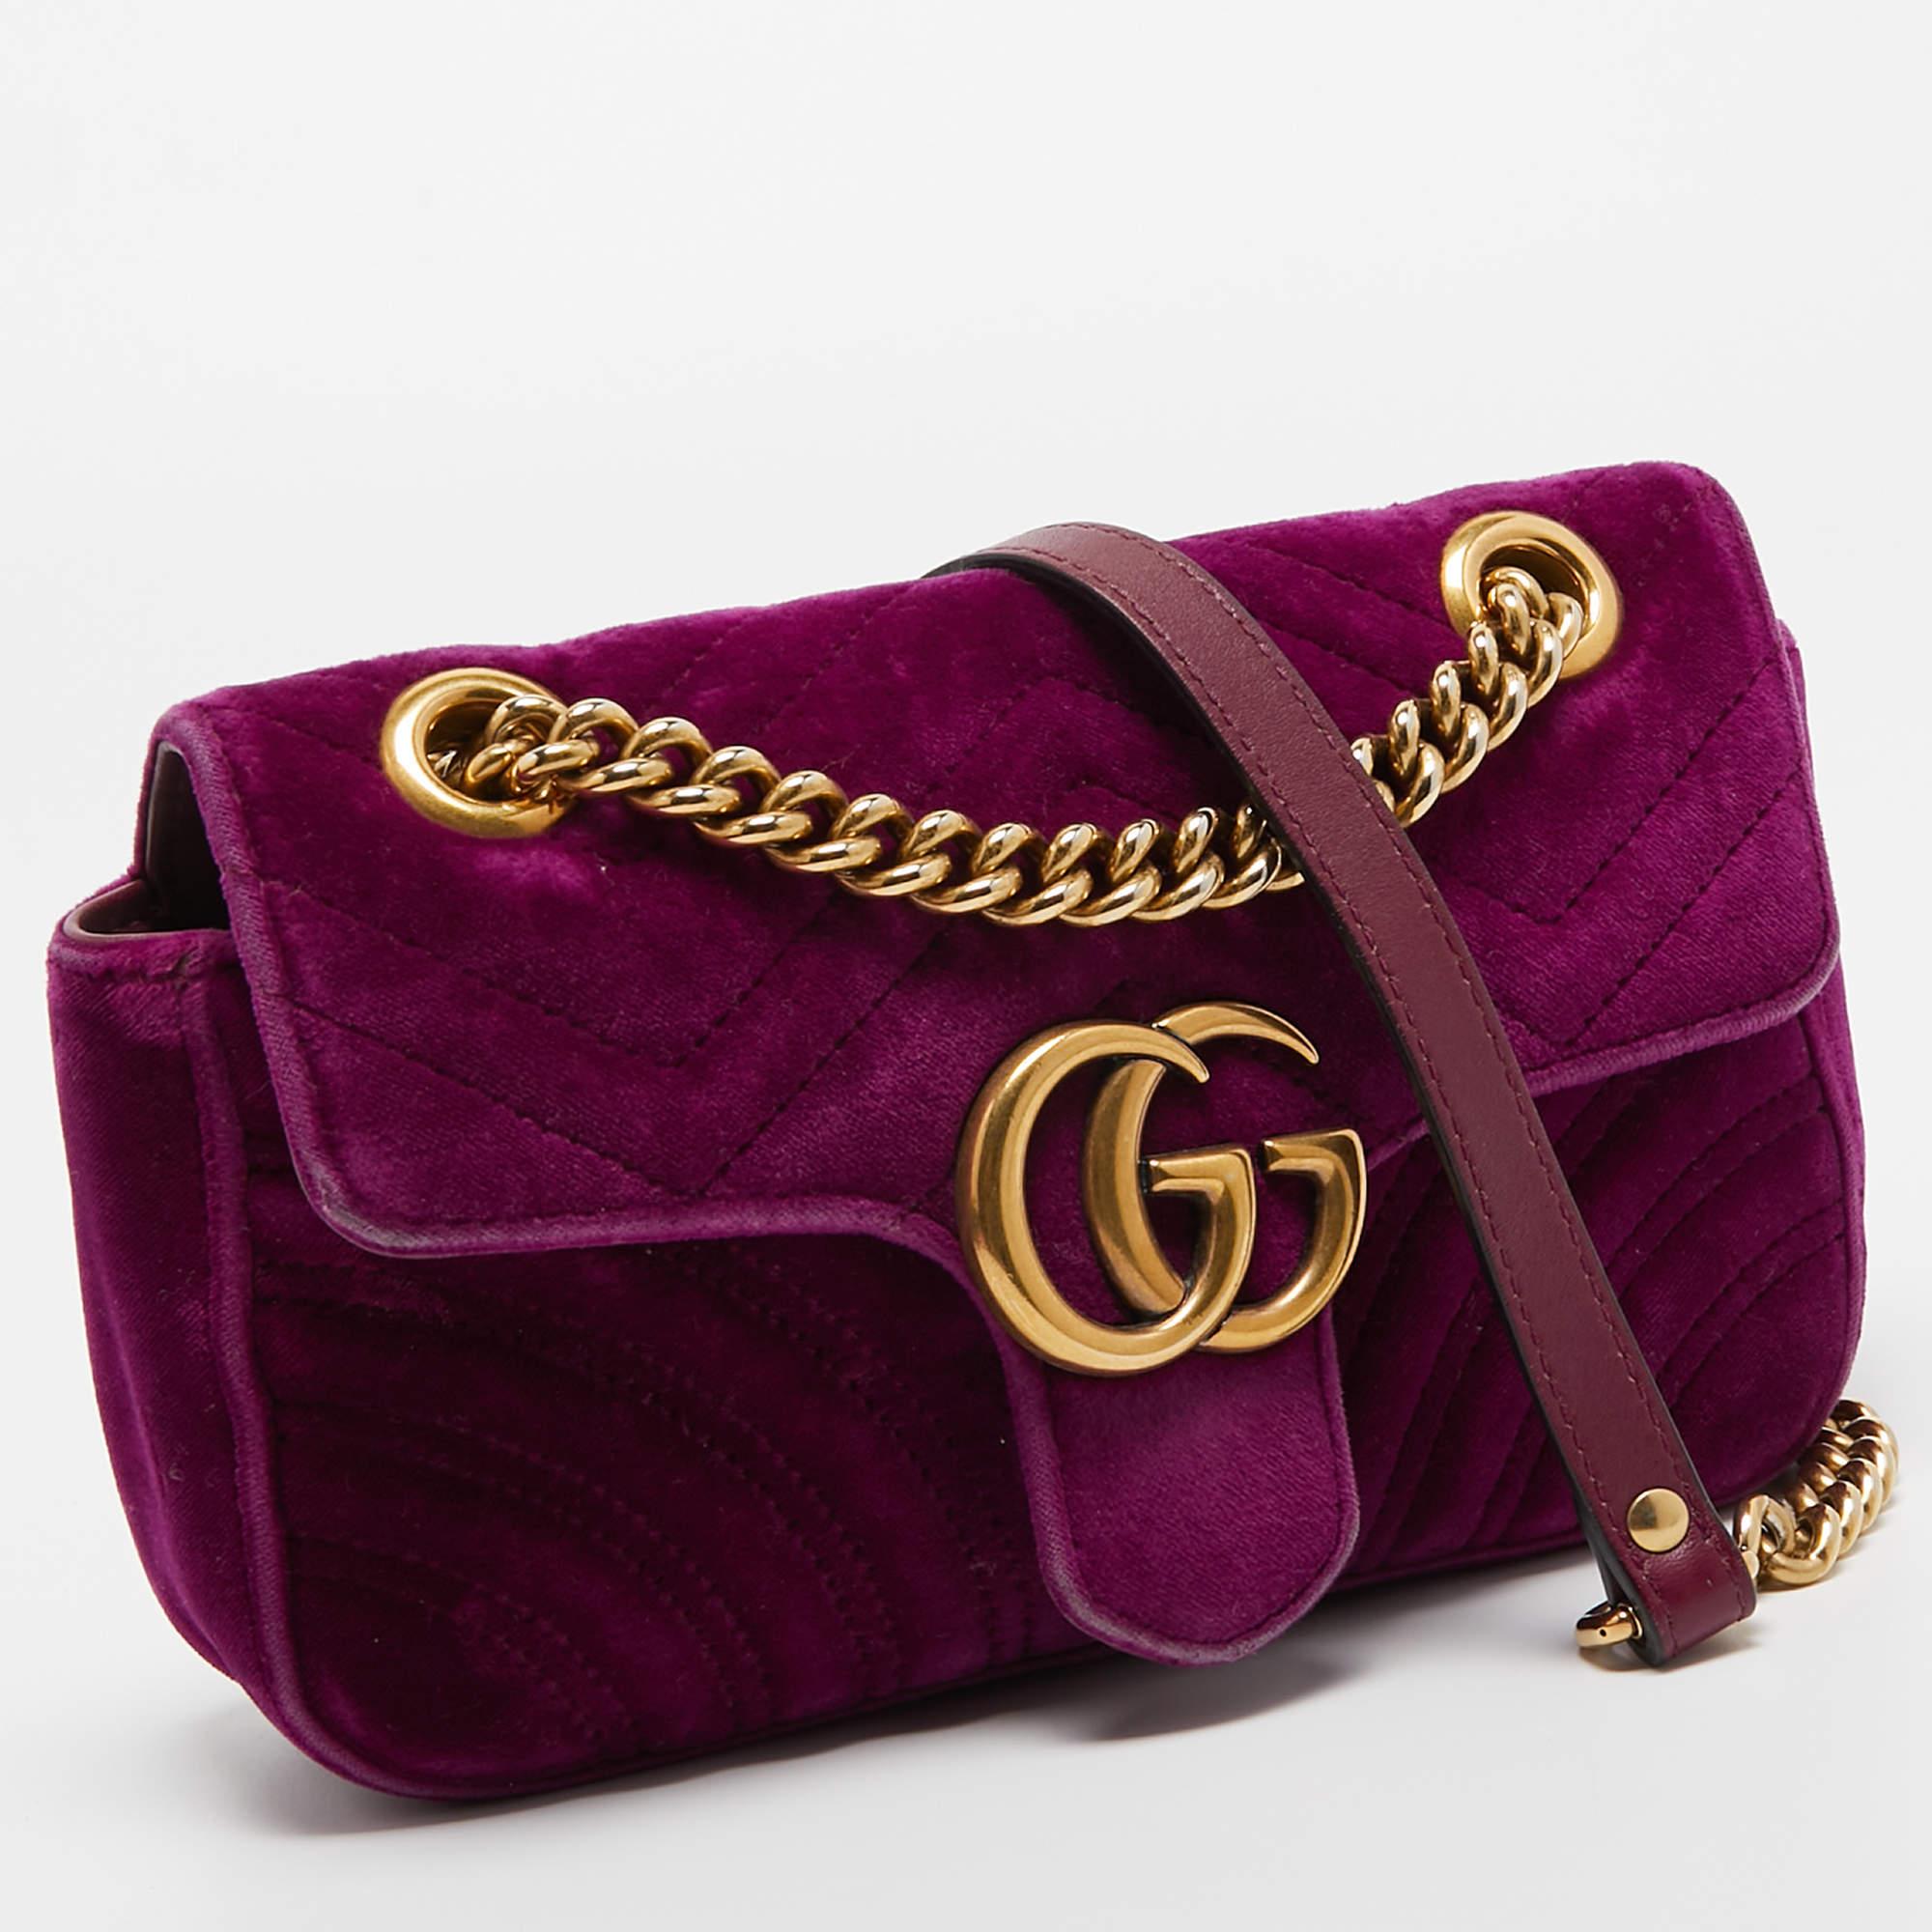 Perfect for conveniently housing your essentials in one place, this Gucci bag is a worthy investment. It has notable details and offers a look of luxury.

